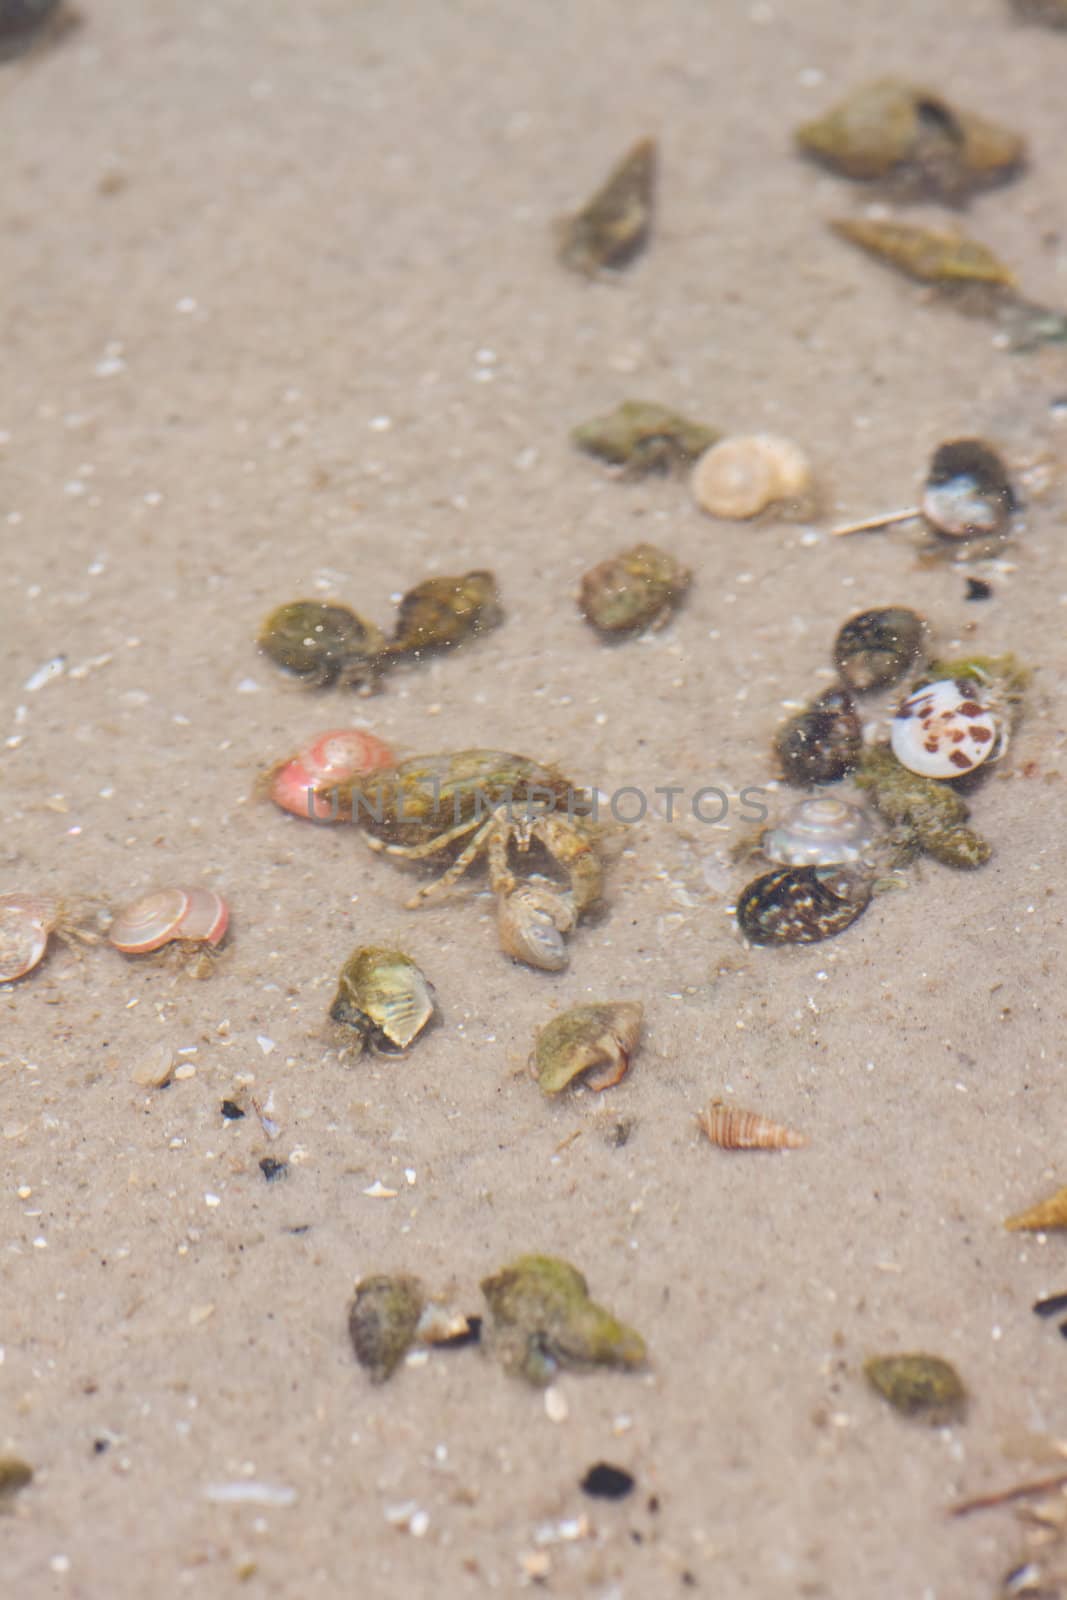 Hermit crab in its conch on the sand  by nikky1972